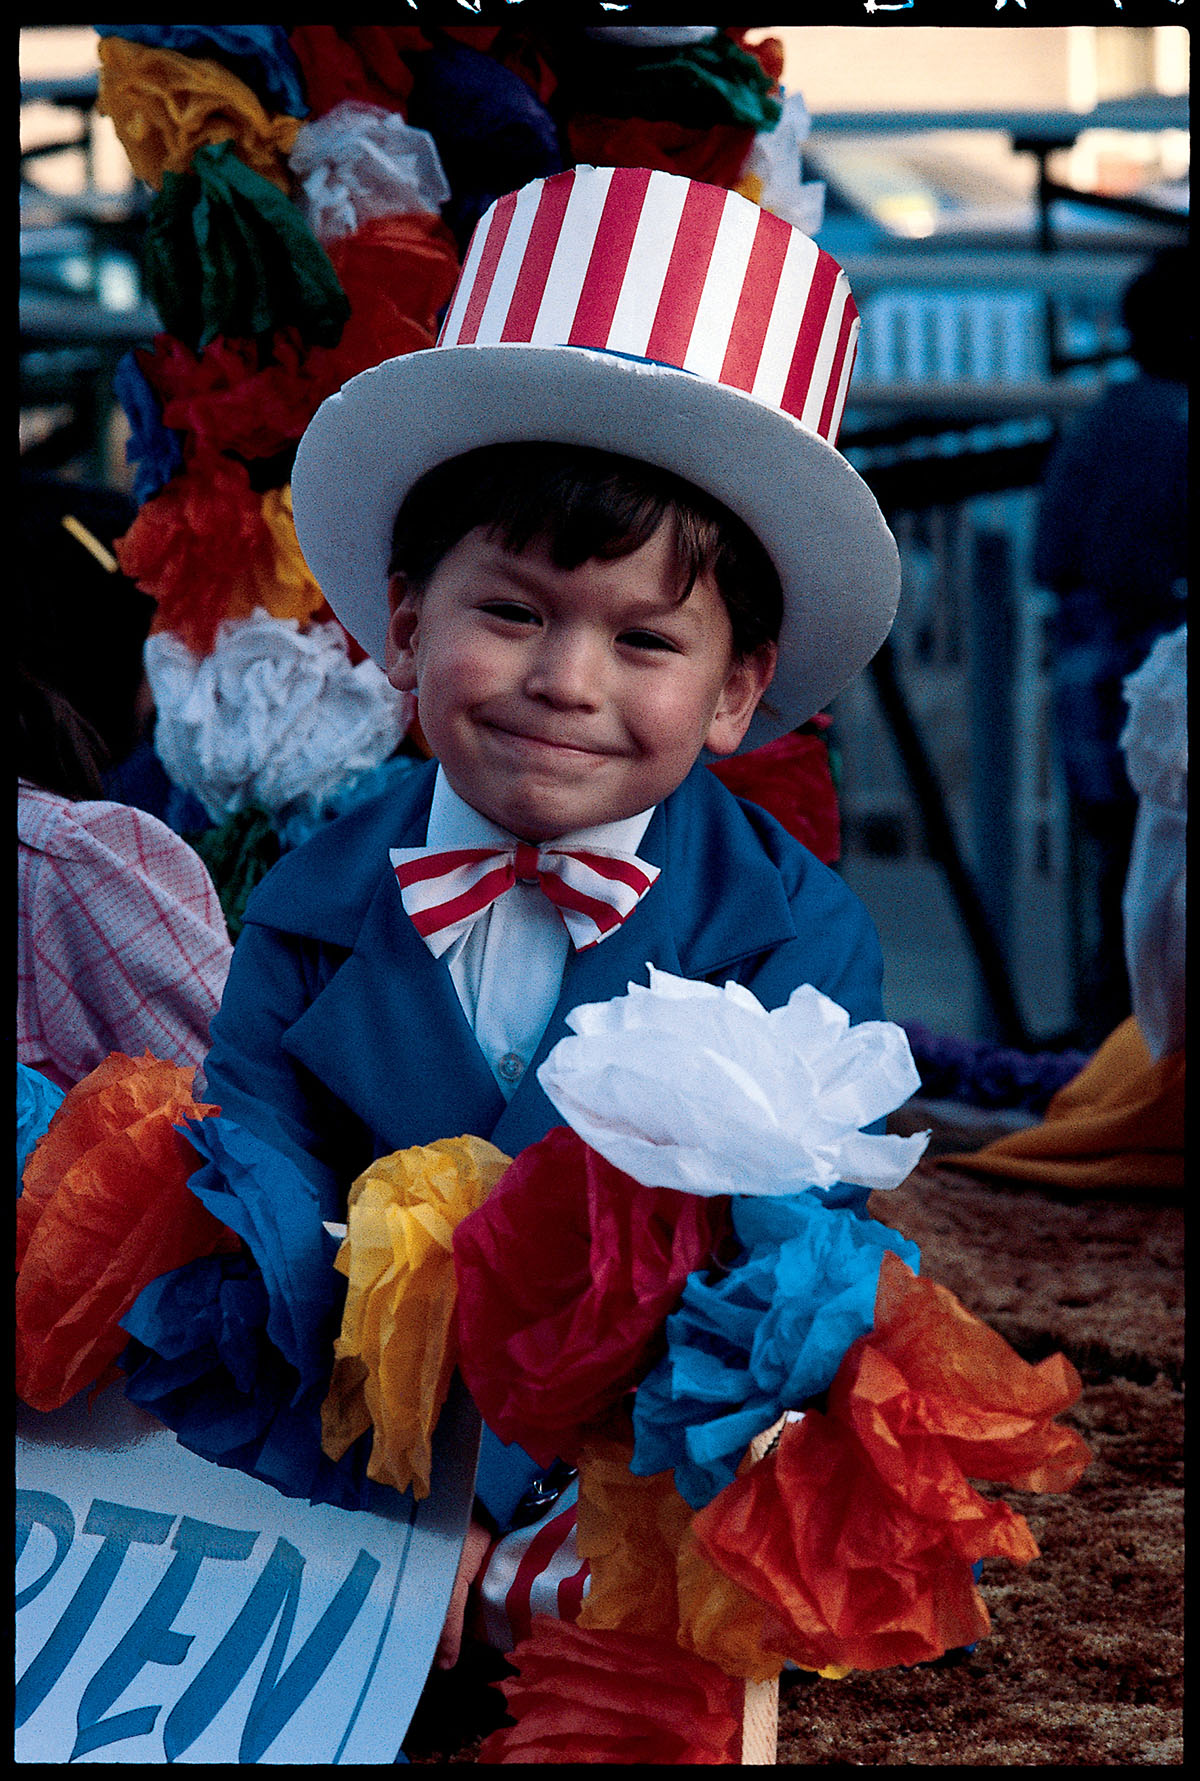 A child wears a patriotic outfit including a red and white striped hat